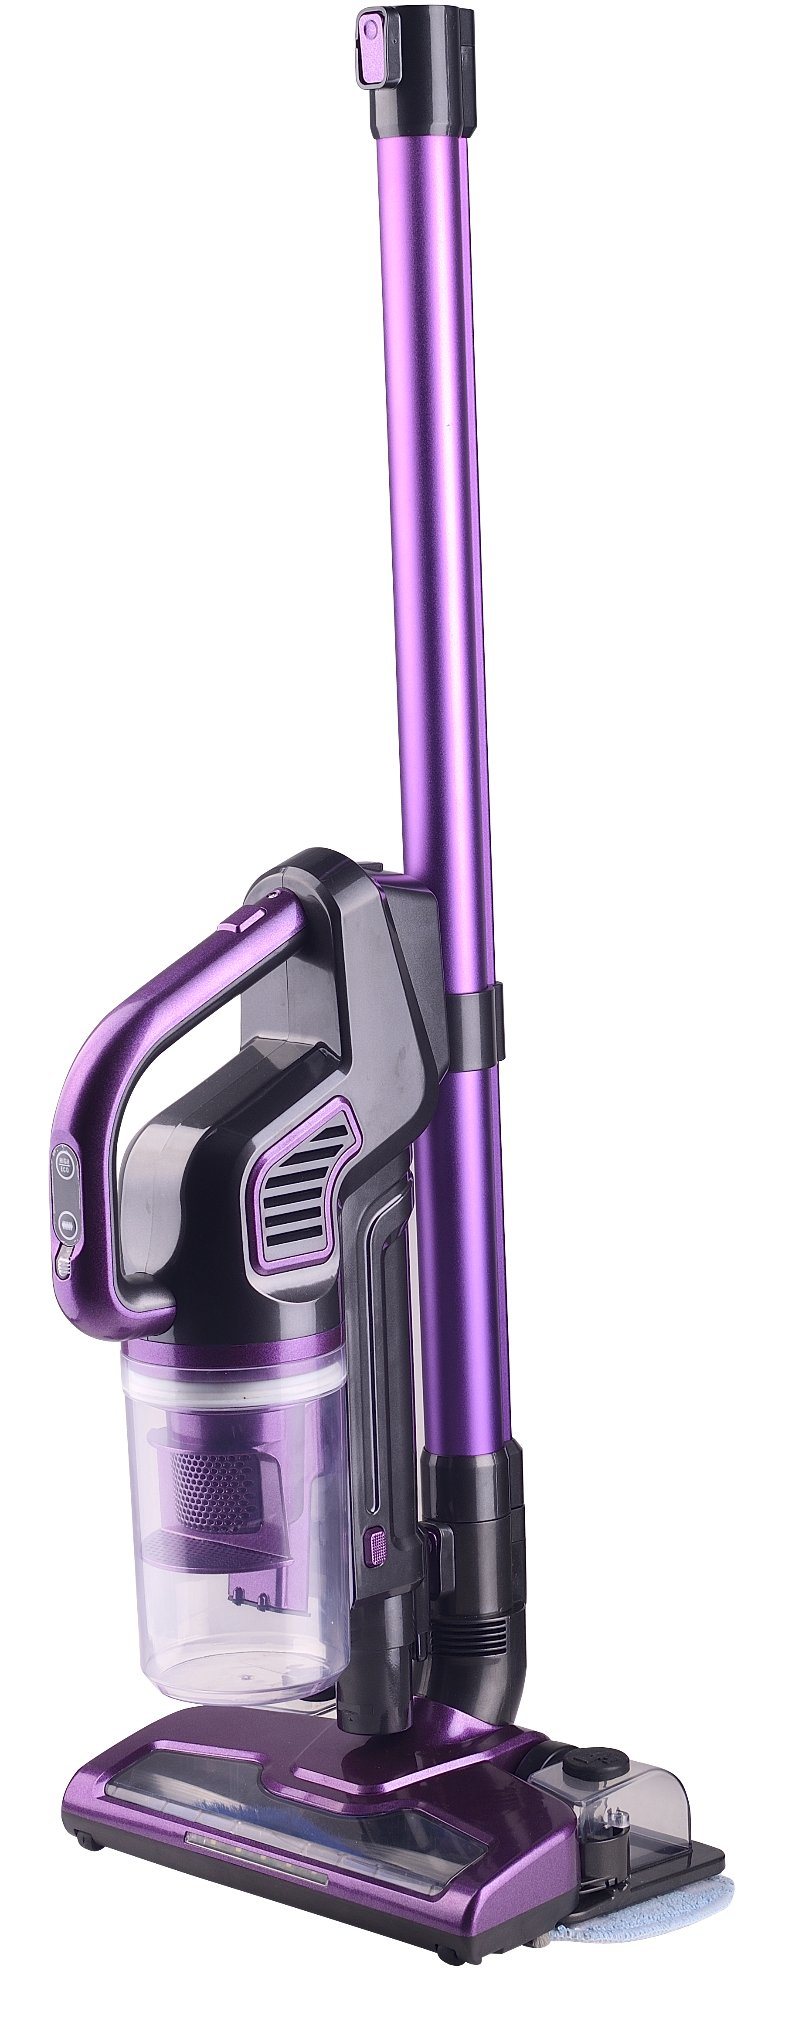 Cordless-Lithium-Battery-Stick-Handle-with-Mop-Function-Vacuum-Cleaner